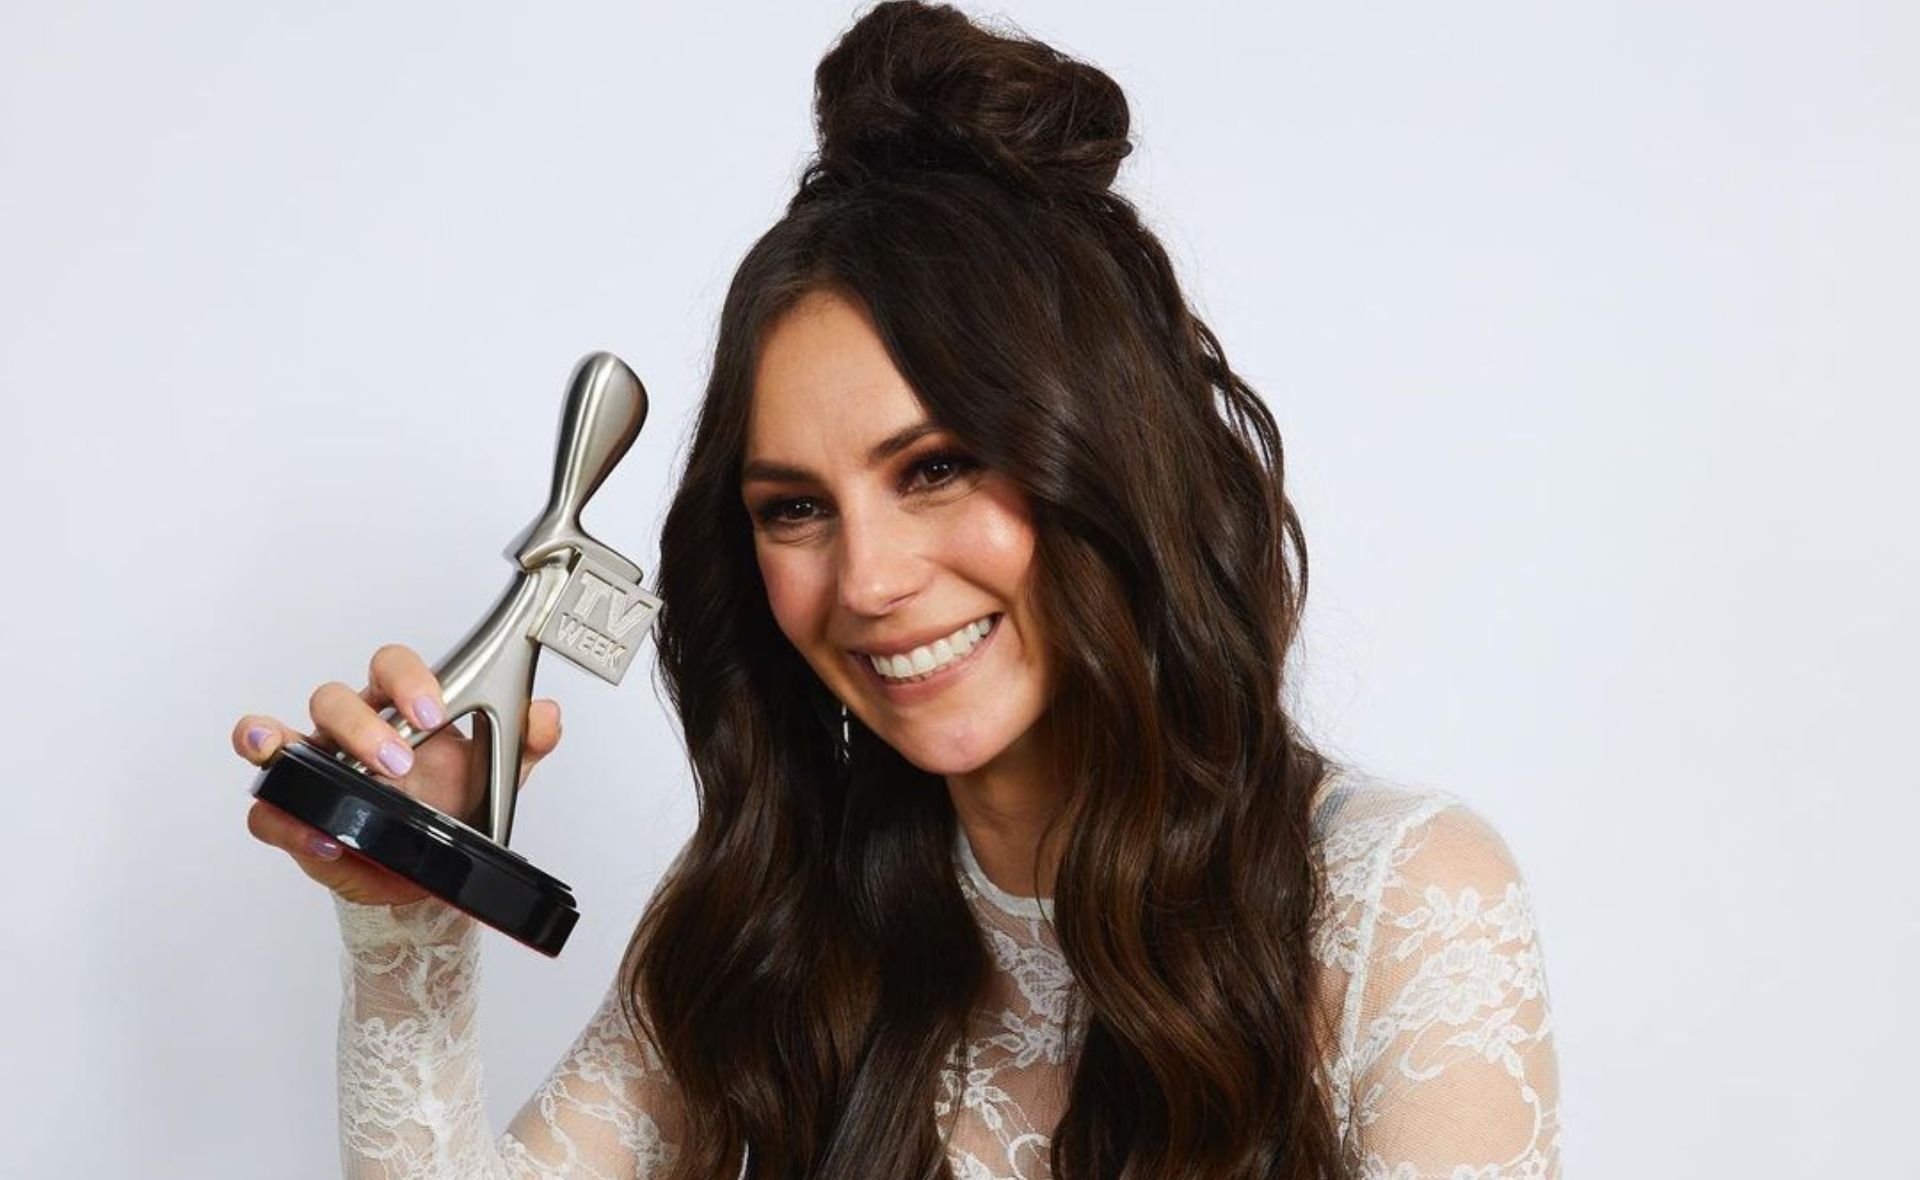 The surprising place Amy Shark plans to keep her Logie Award